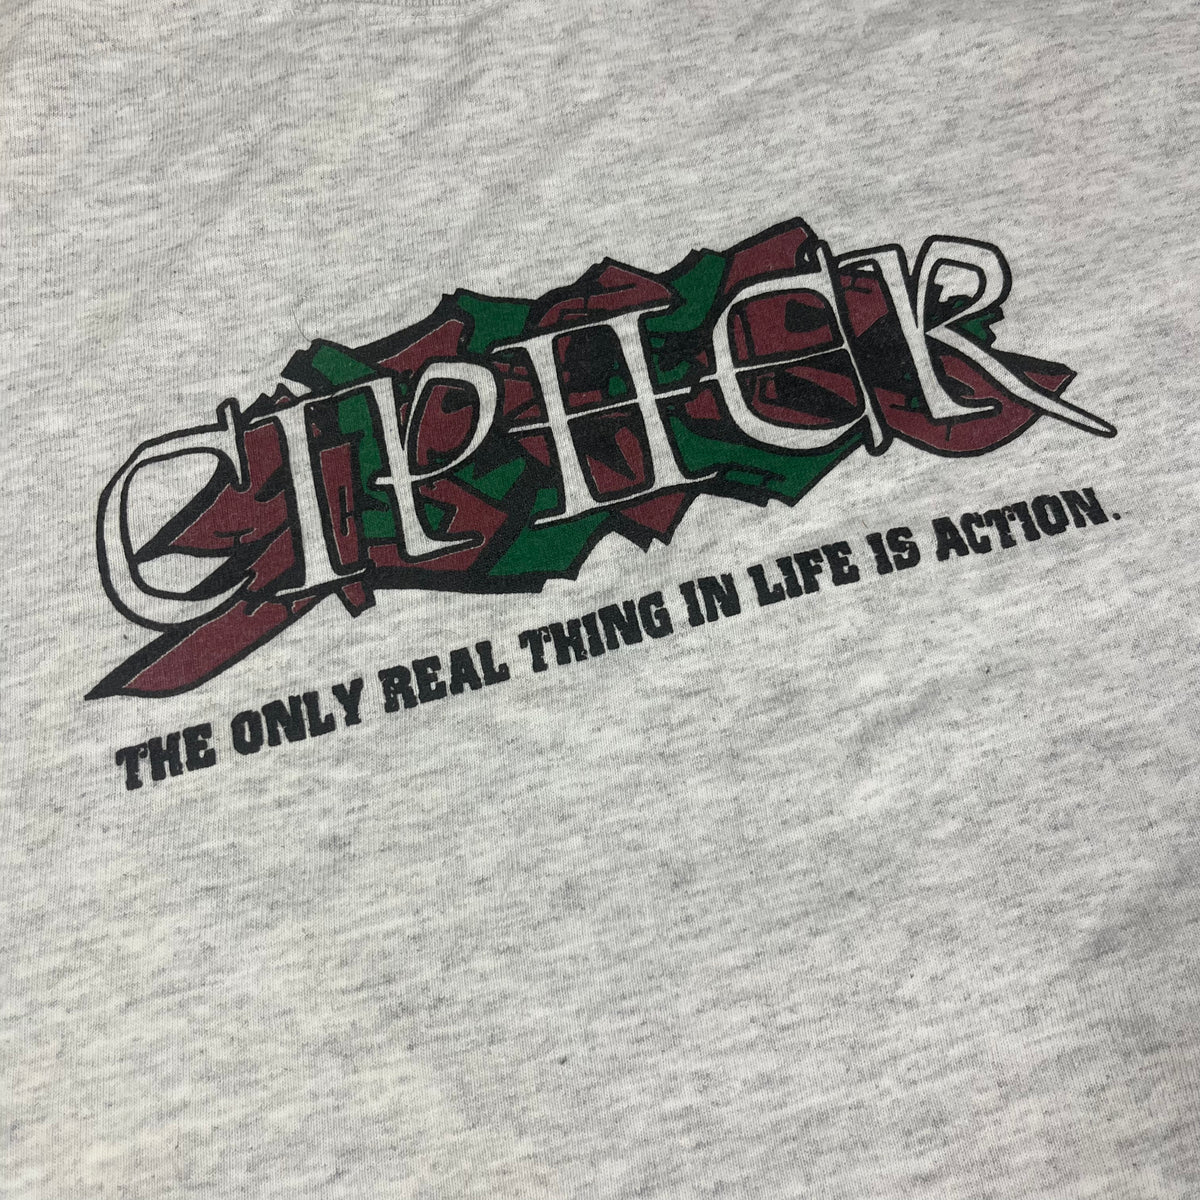 Vintage Cipher &quot;The Only Real Thing In Life Is Action&quot; Long Sleeve Shirt